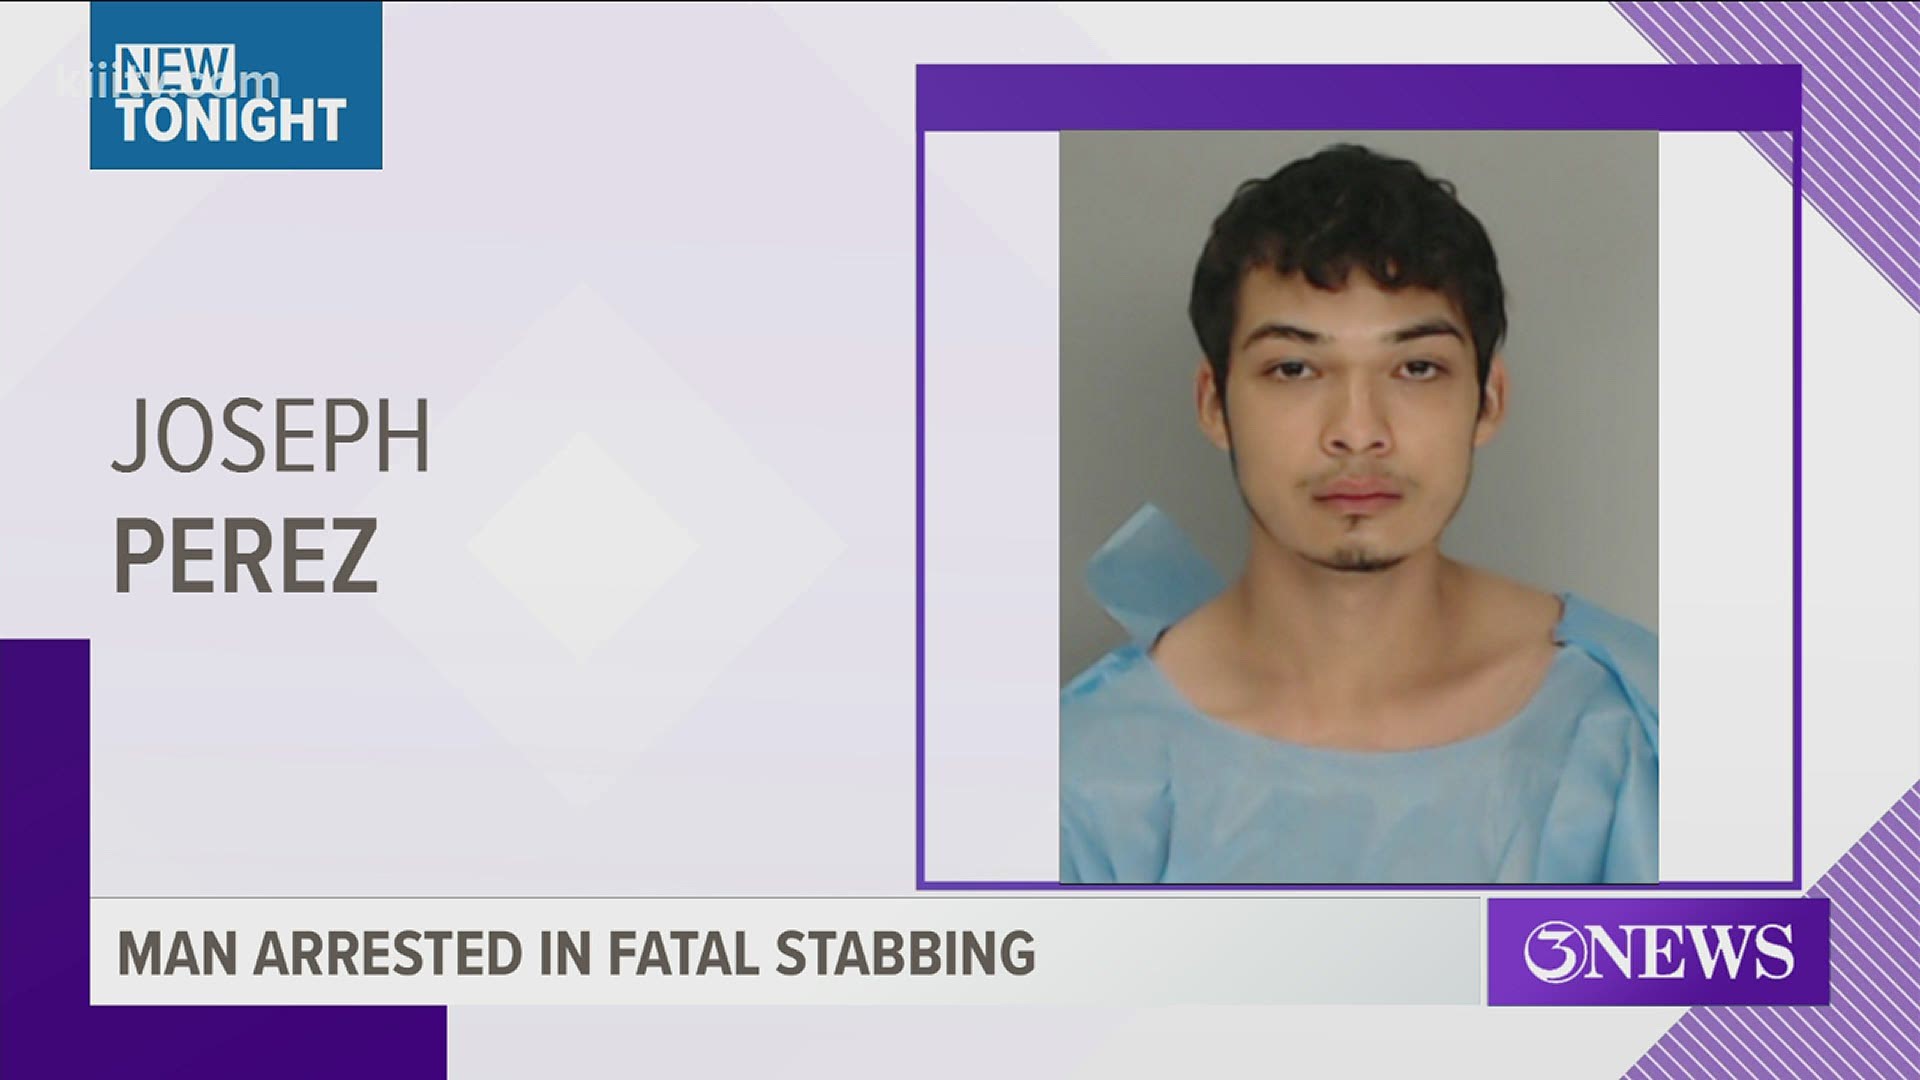 21-year-old Joseph Perez was arrested Sunday night on a capital murder warrant.